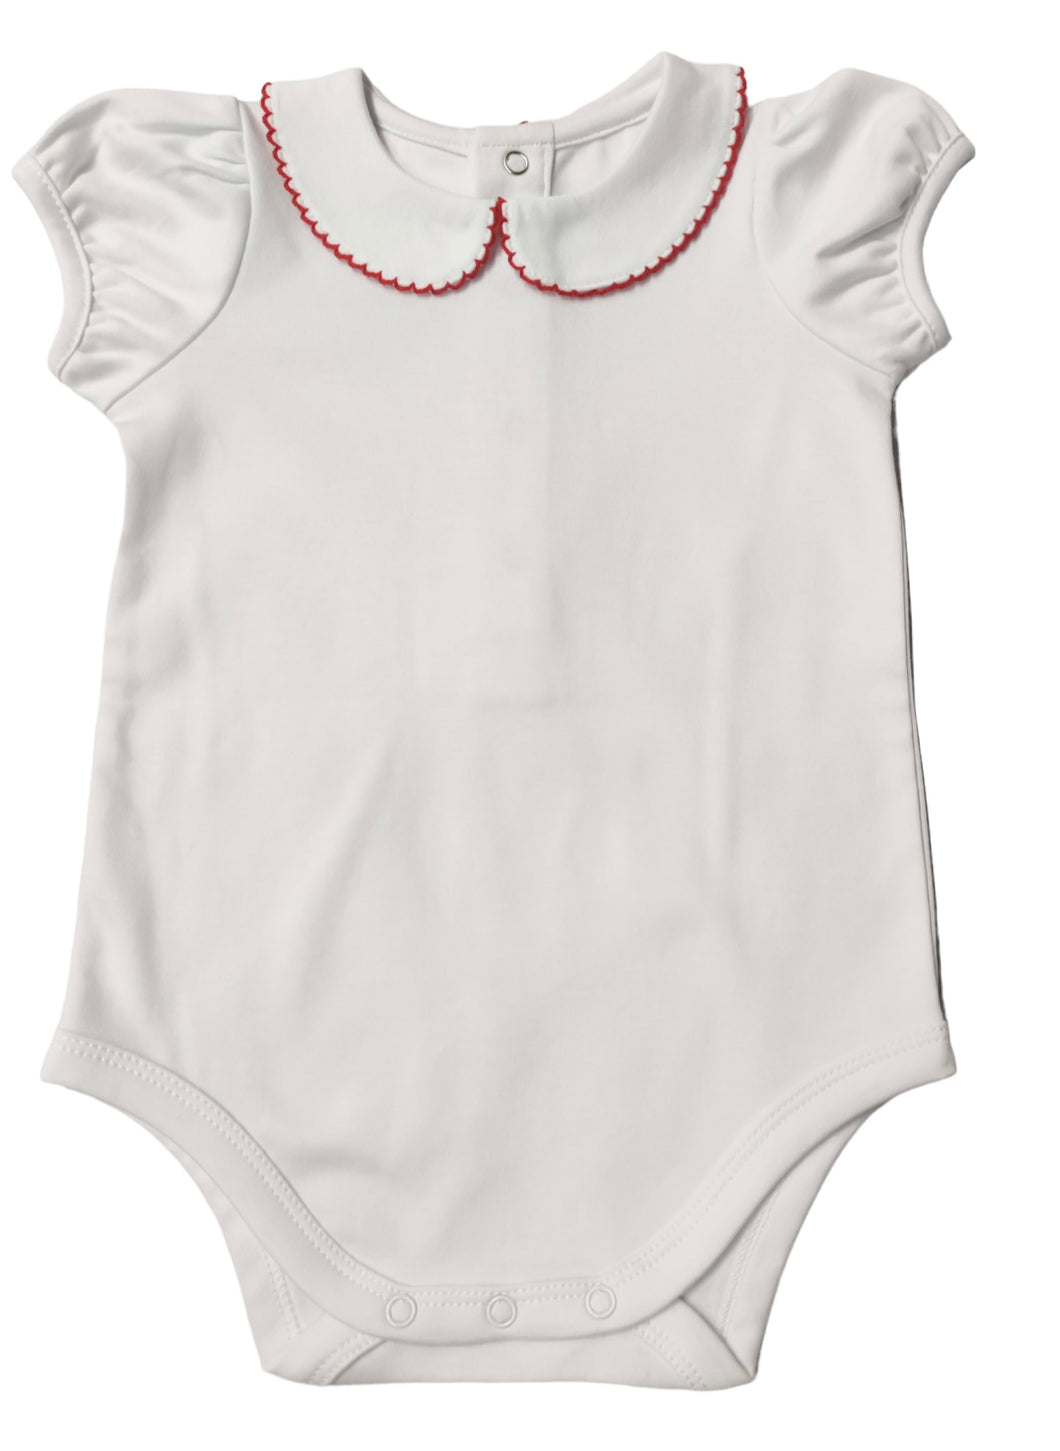 The Collared Bodysuit ~ Puff Sleeve w/ Red Picot Trim